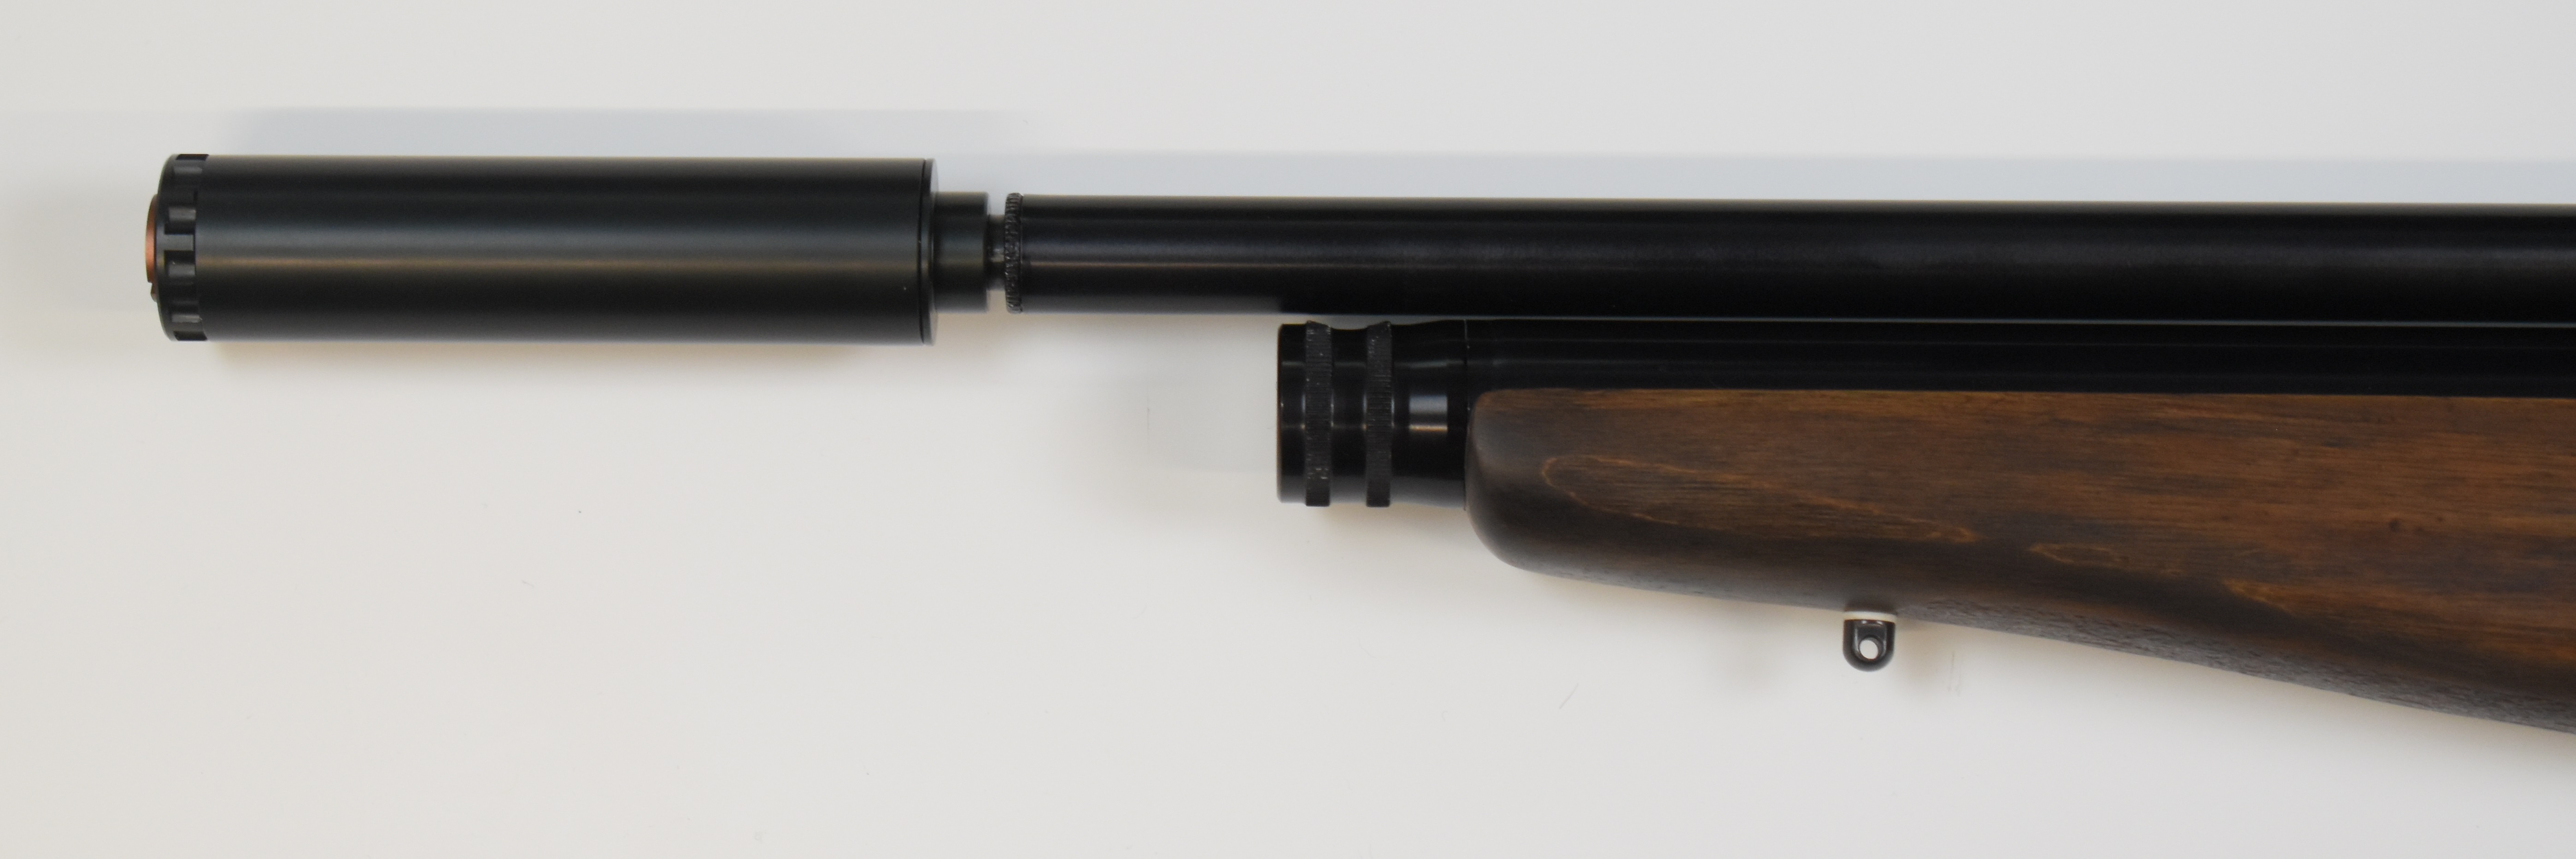 Webley Raider 12 .22 PCP air rifle with aluminium carbine cylinder, textured semi-pistol grip and - Image 9 of 11